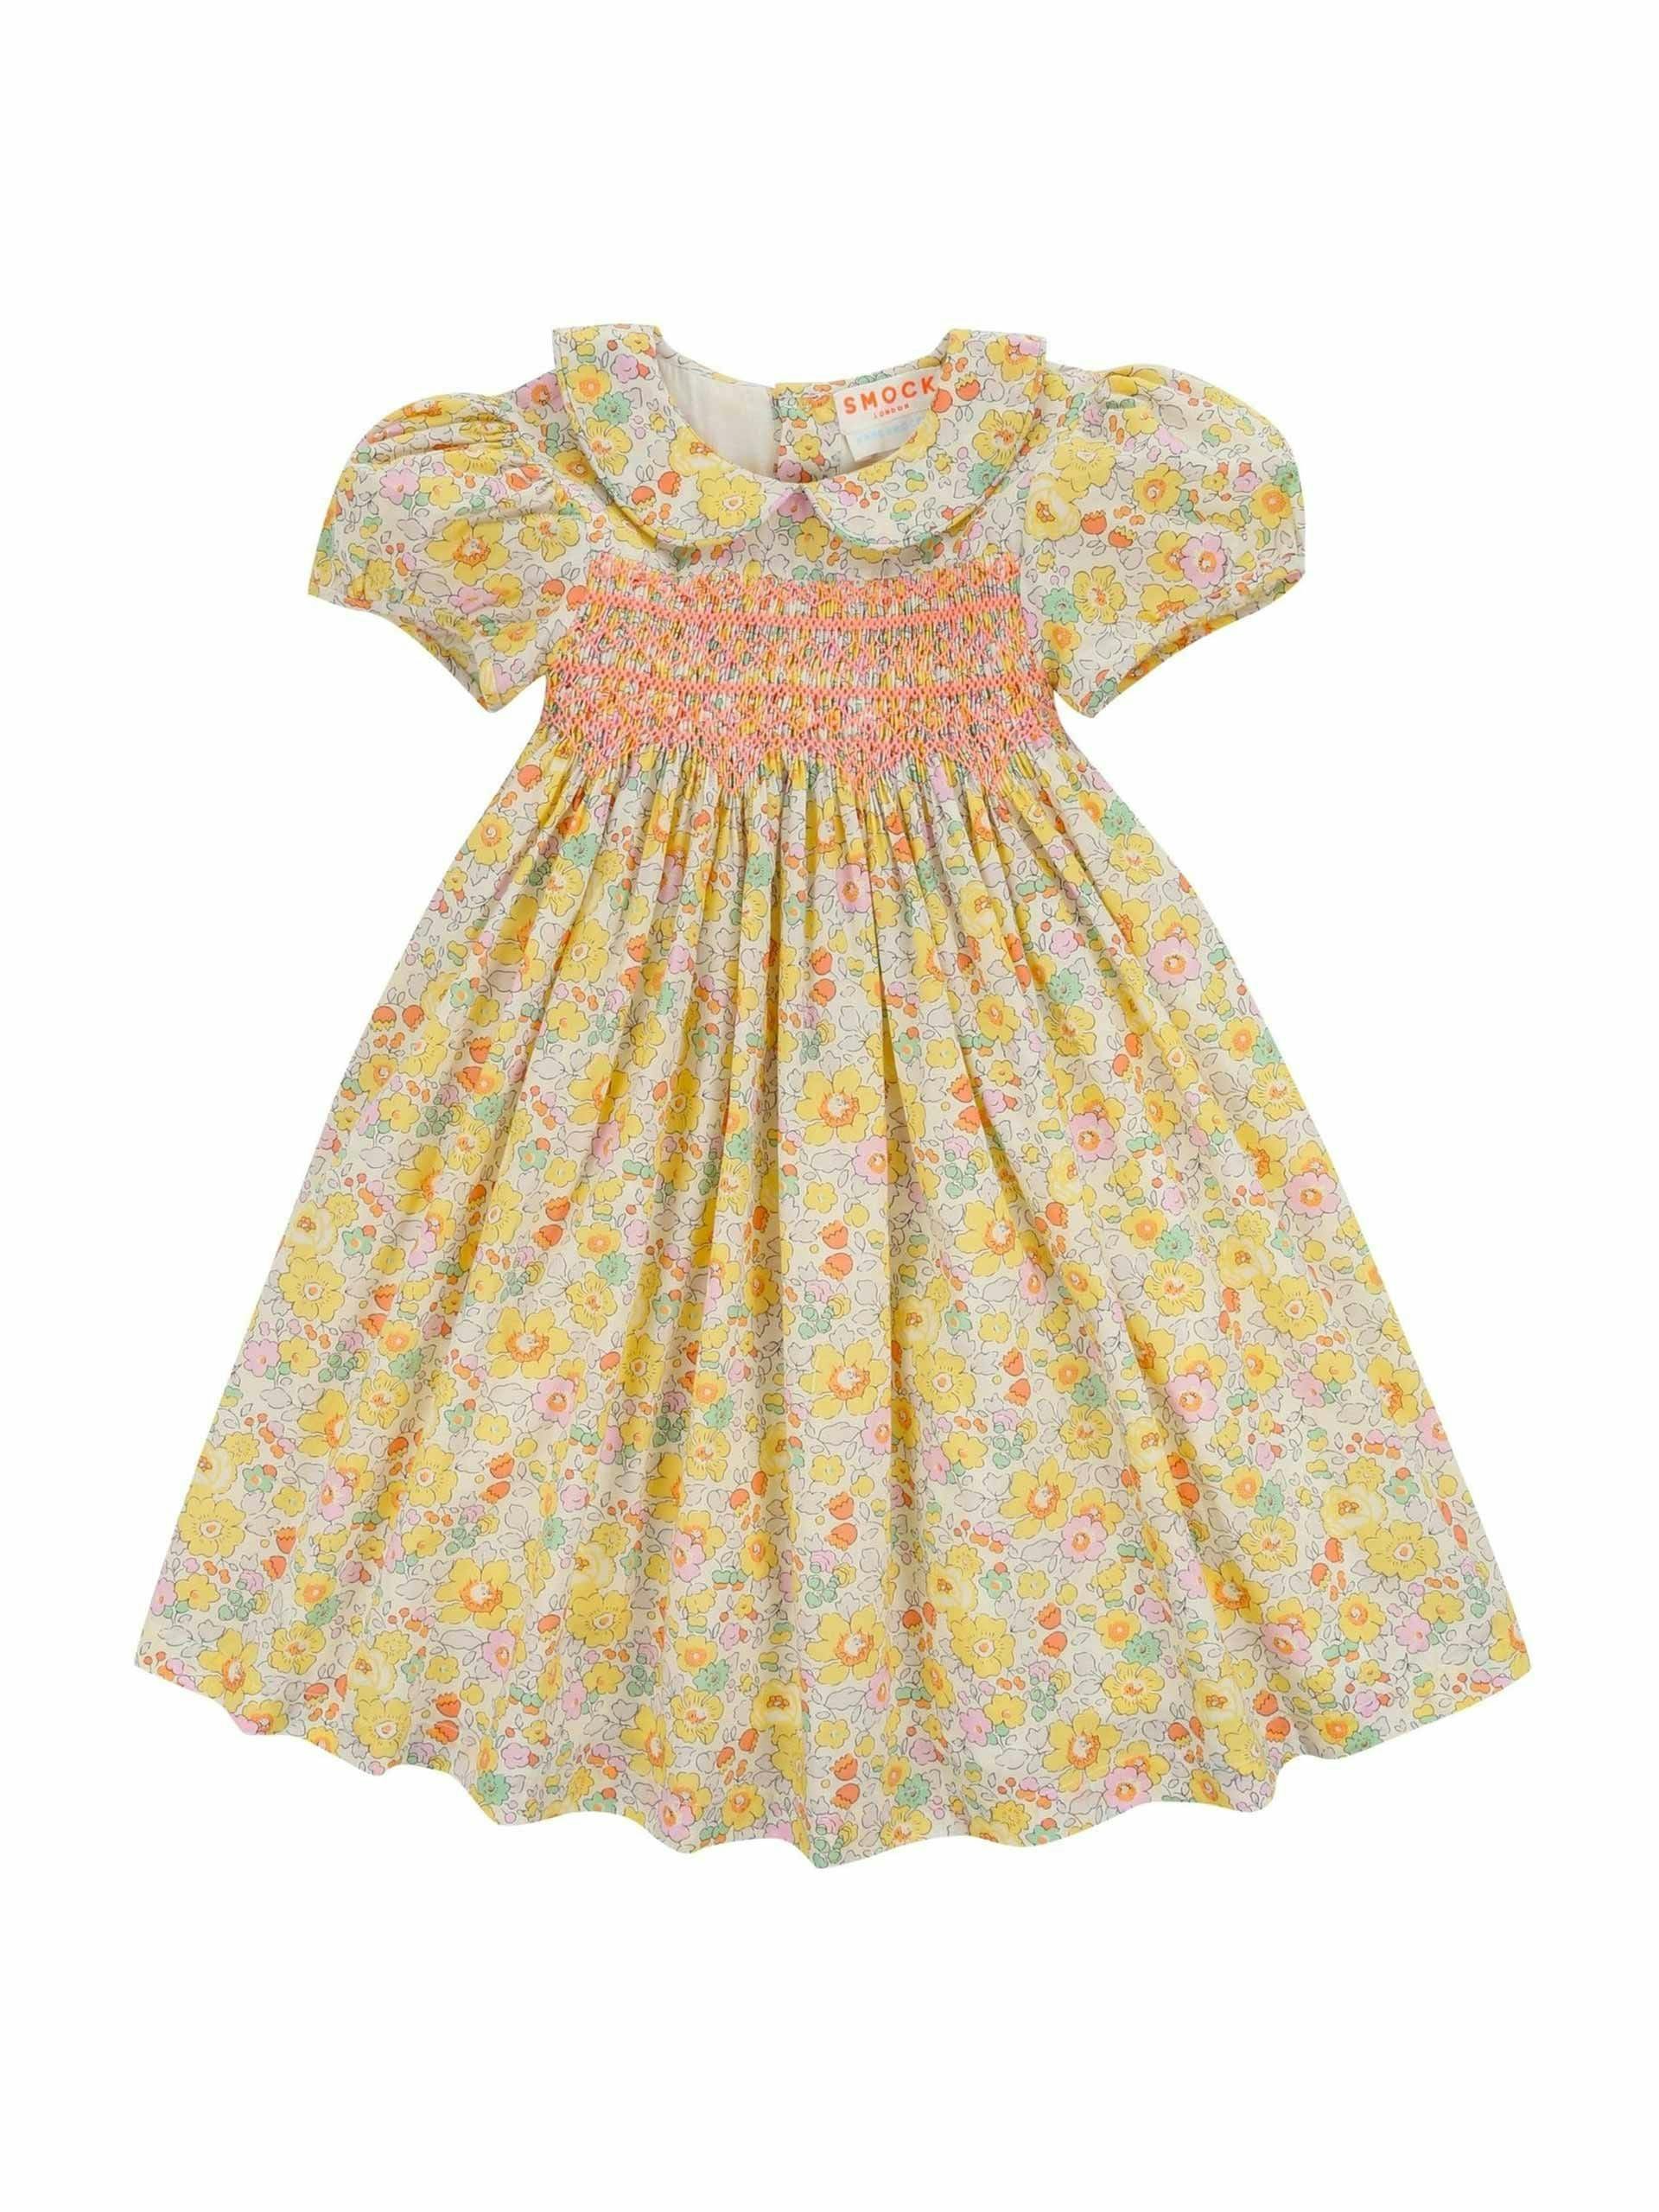 Floral dress with coral smocking